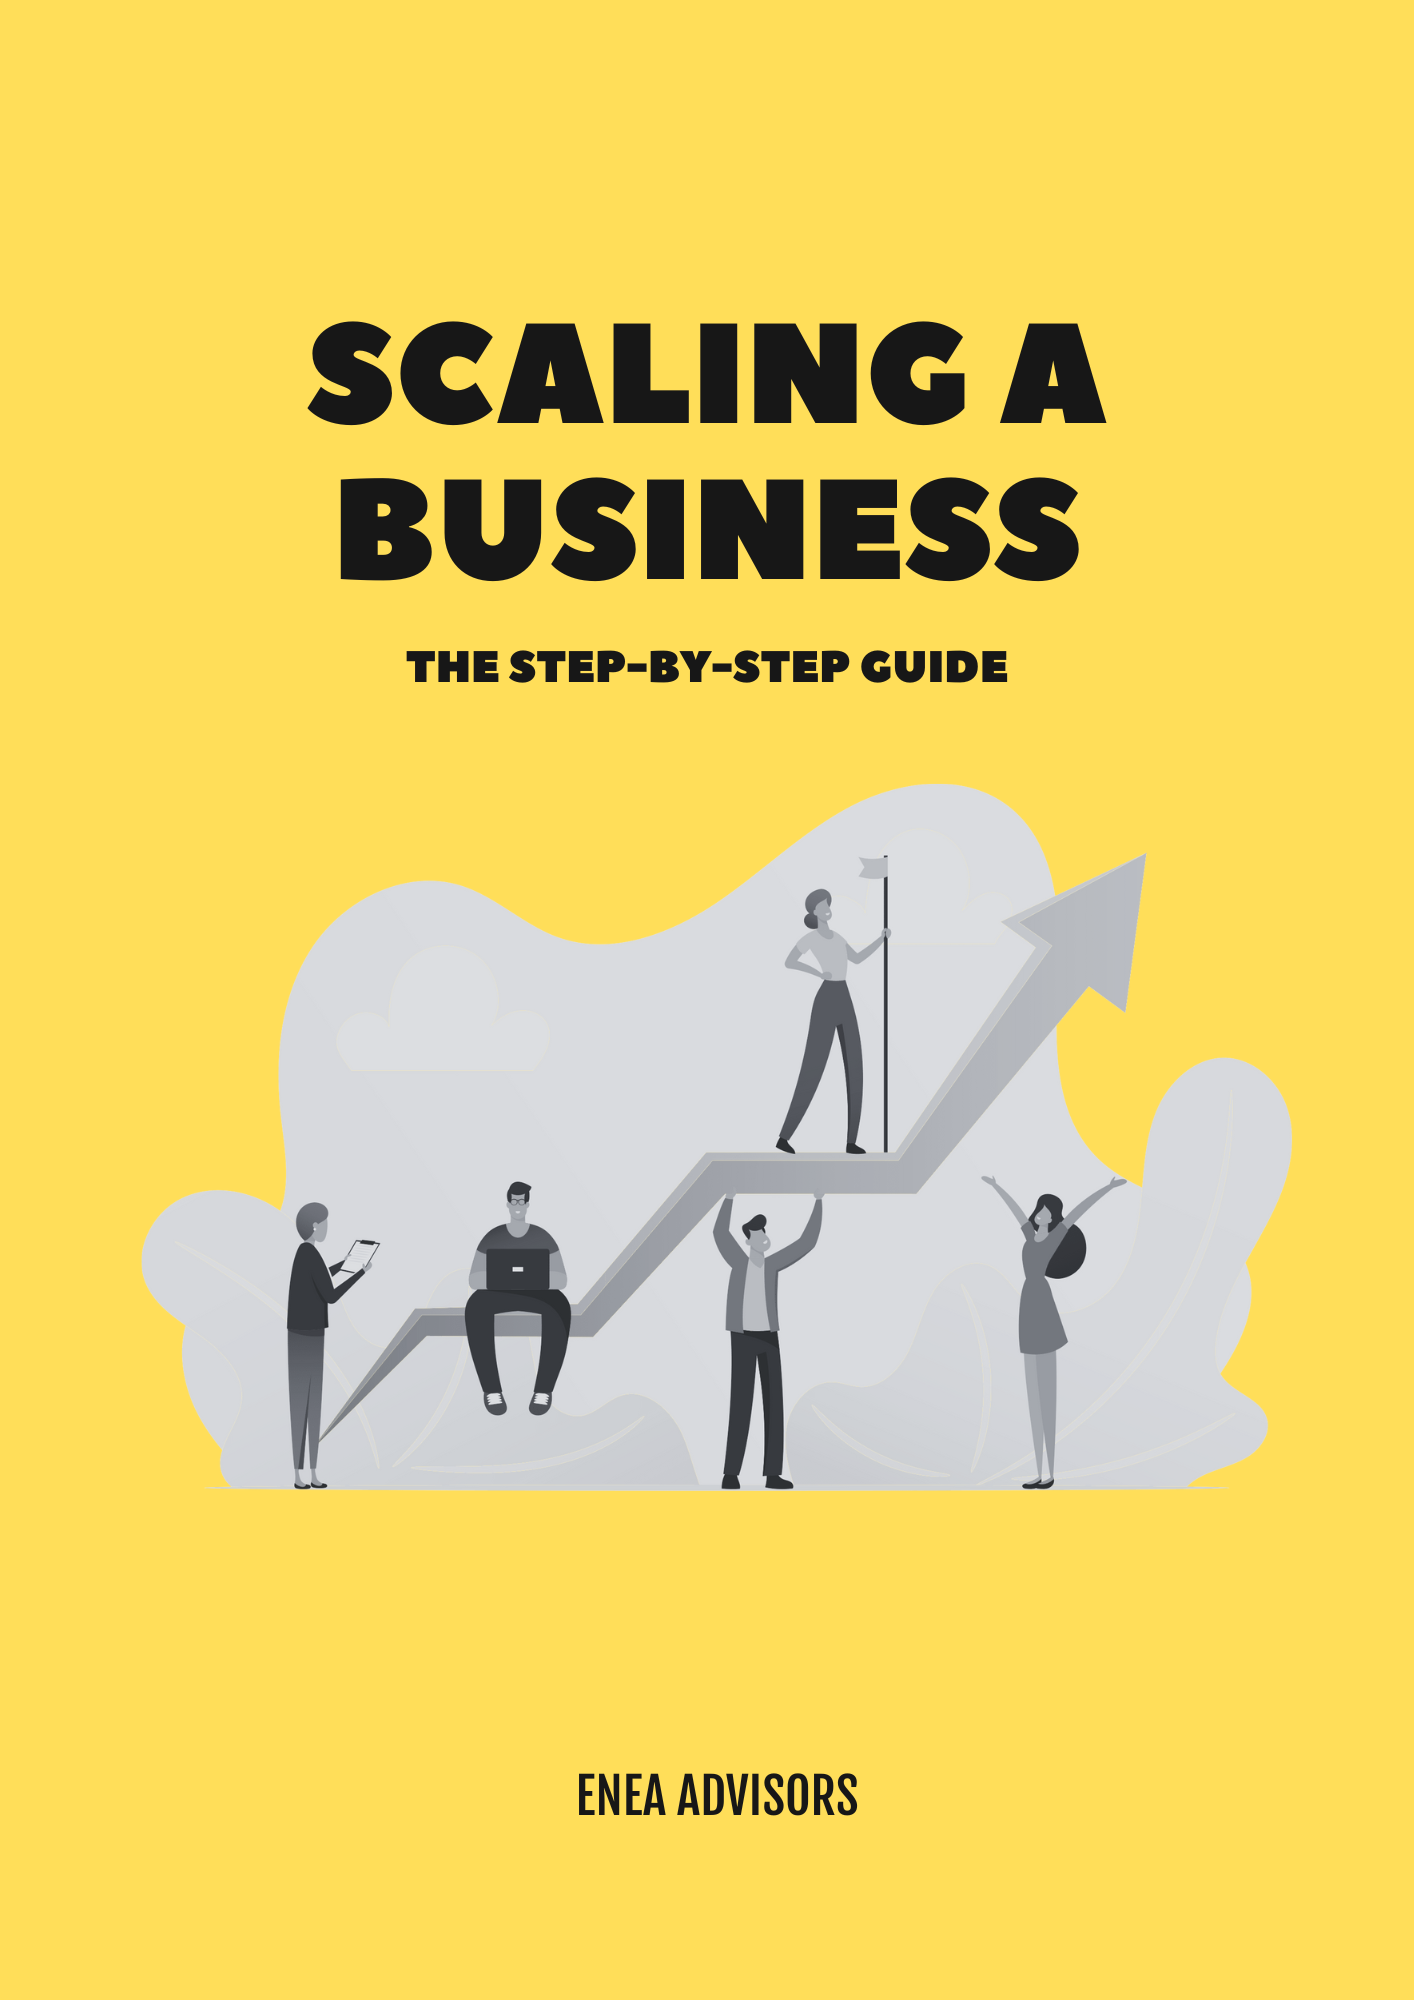 Scaling a Business - Resource Bank (Report) (1)